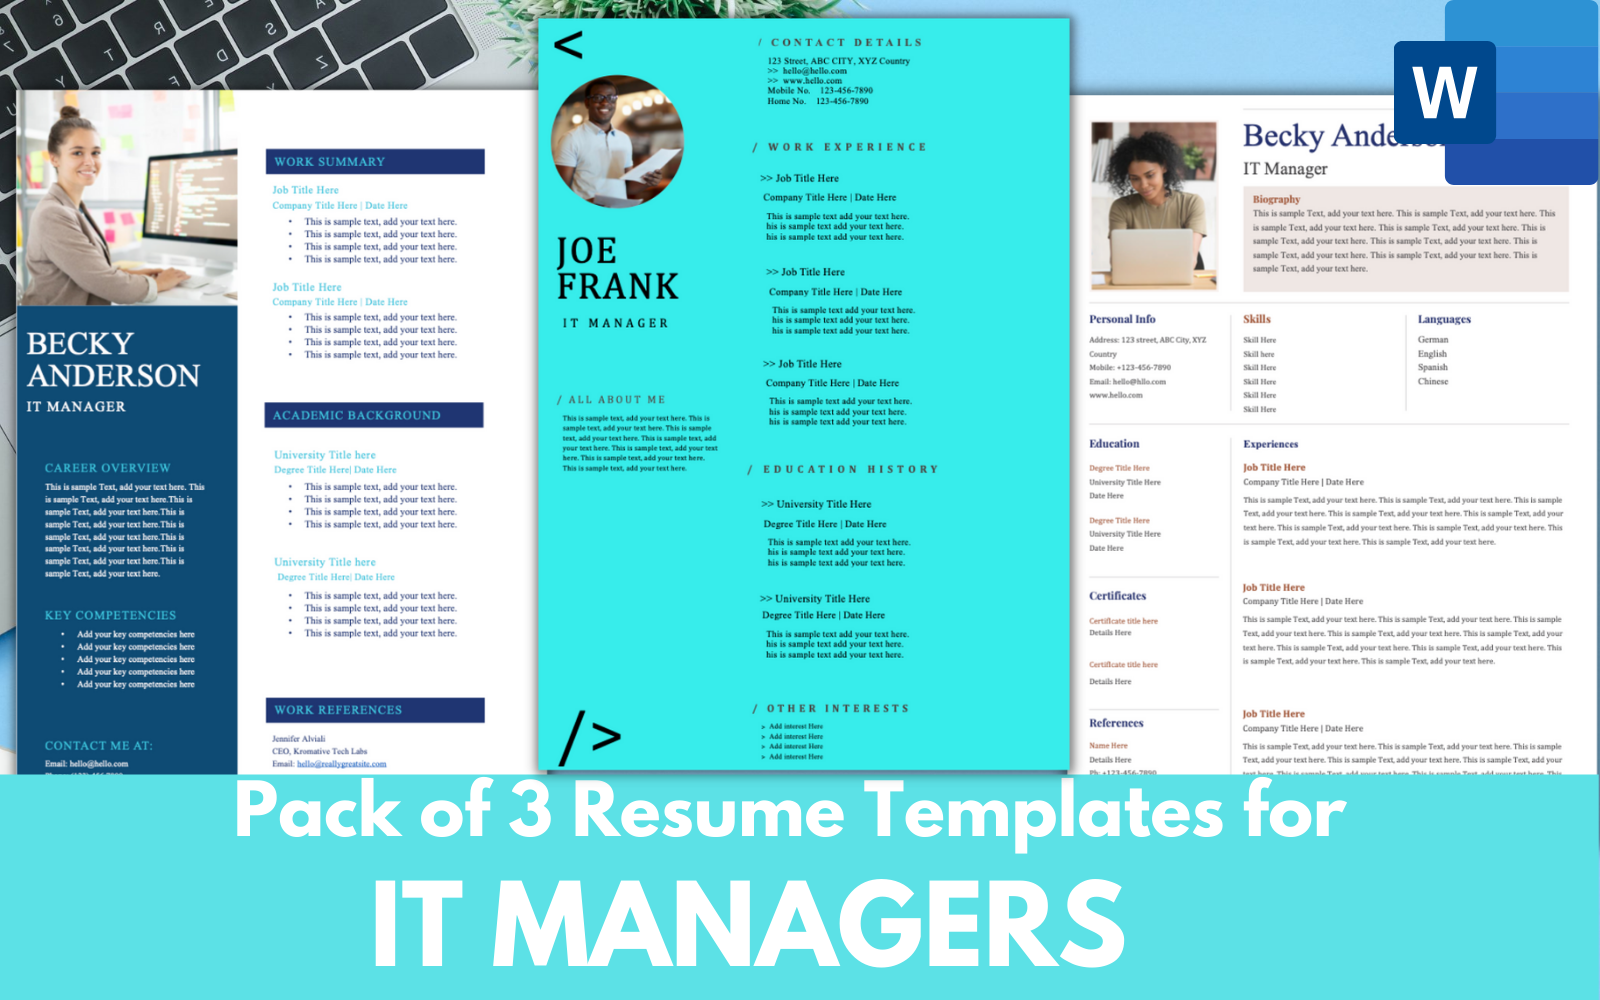 pack-of-3-resume-templates-for-it-managers-ms-word-cv-resume-format